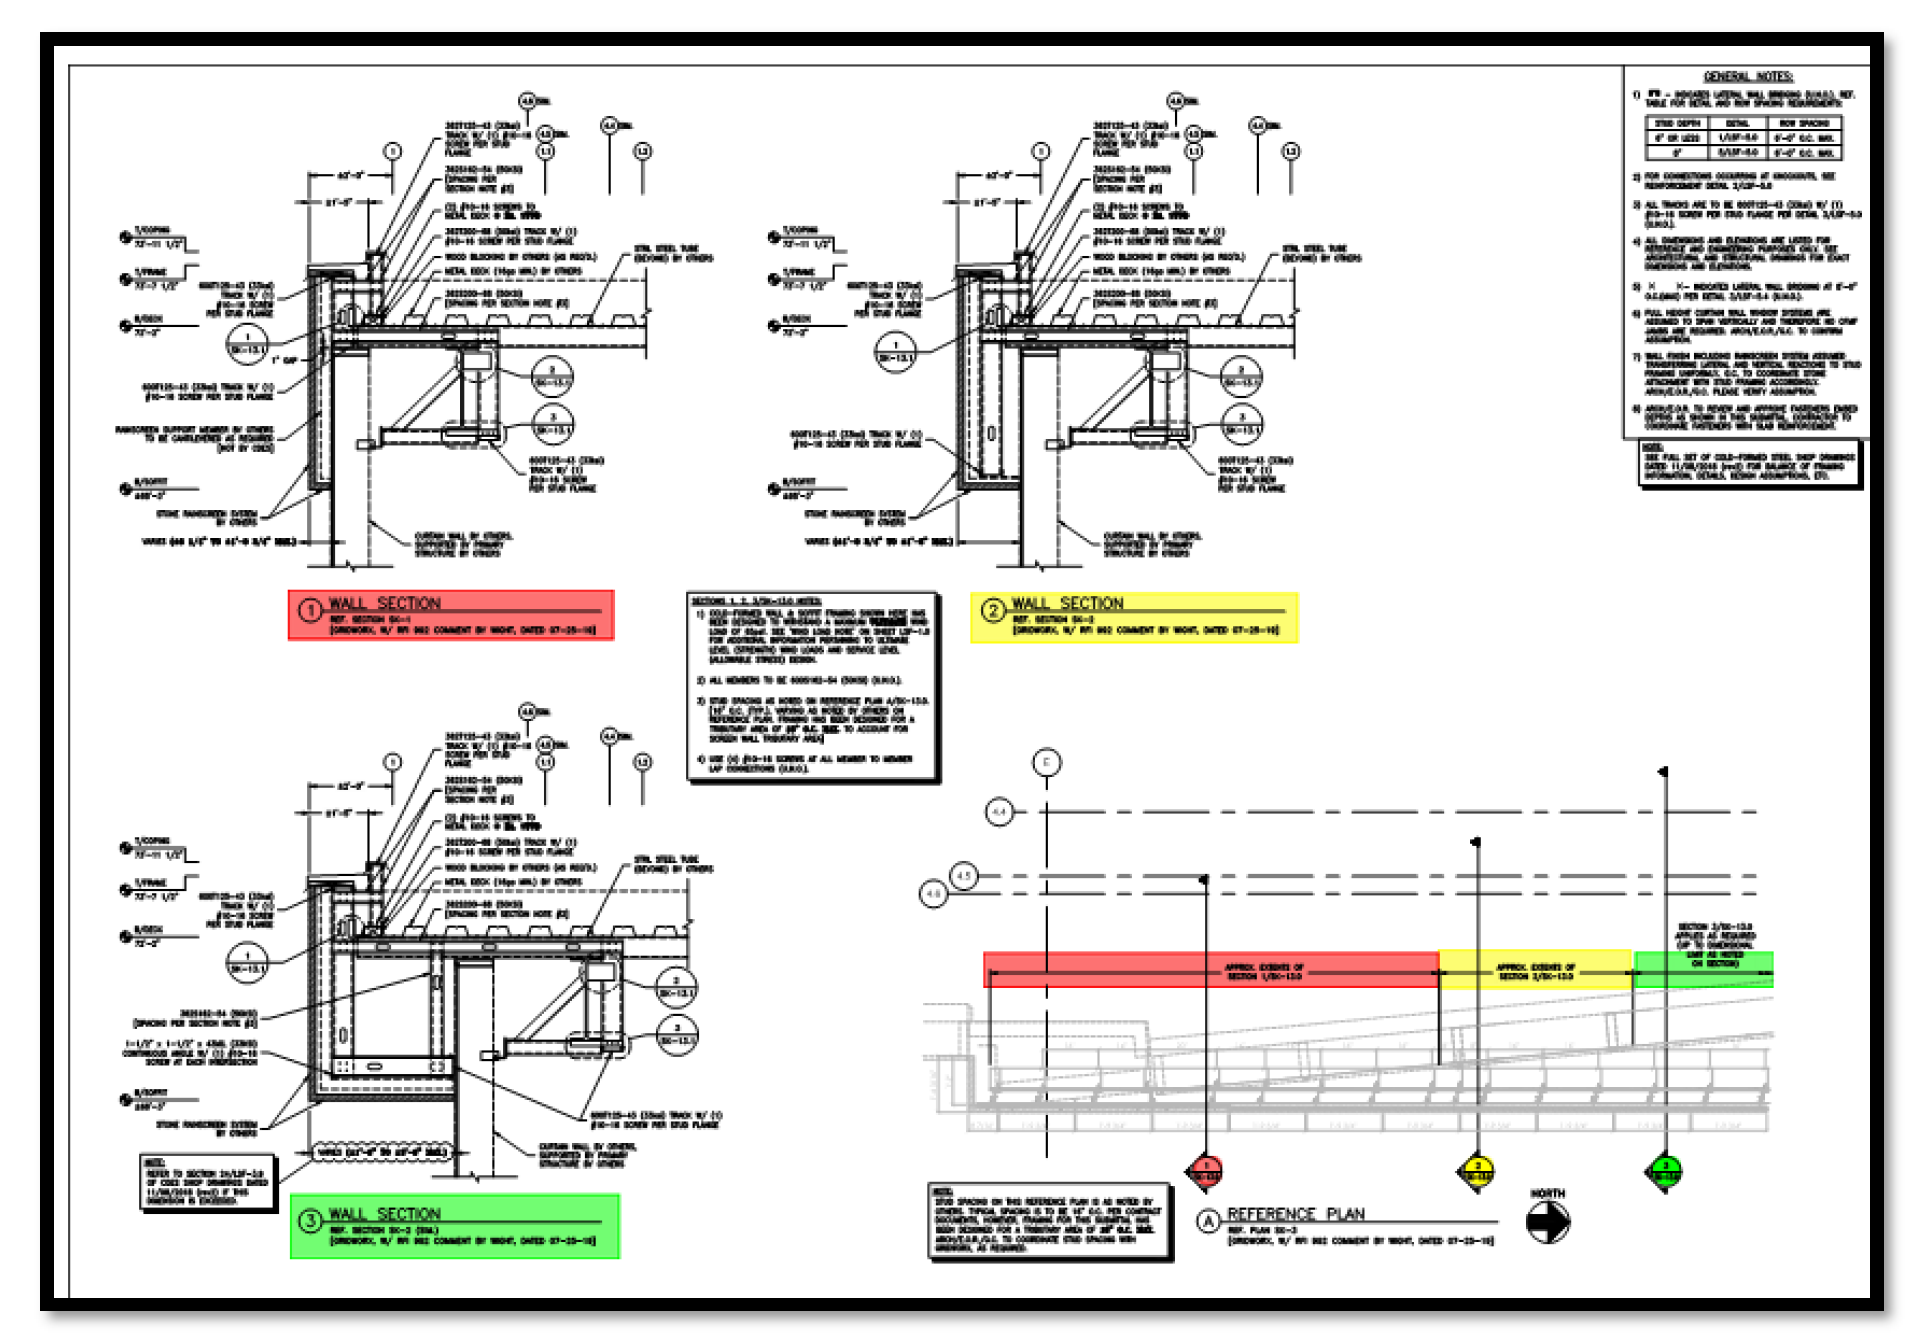 View of cold-formed steel shop drawings for skewed framing conditions (extents of sections
highlighted for clarity).